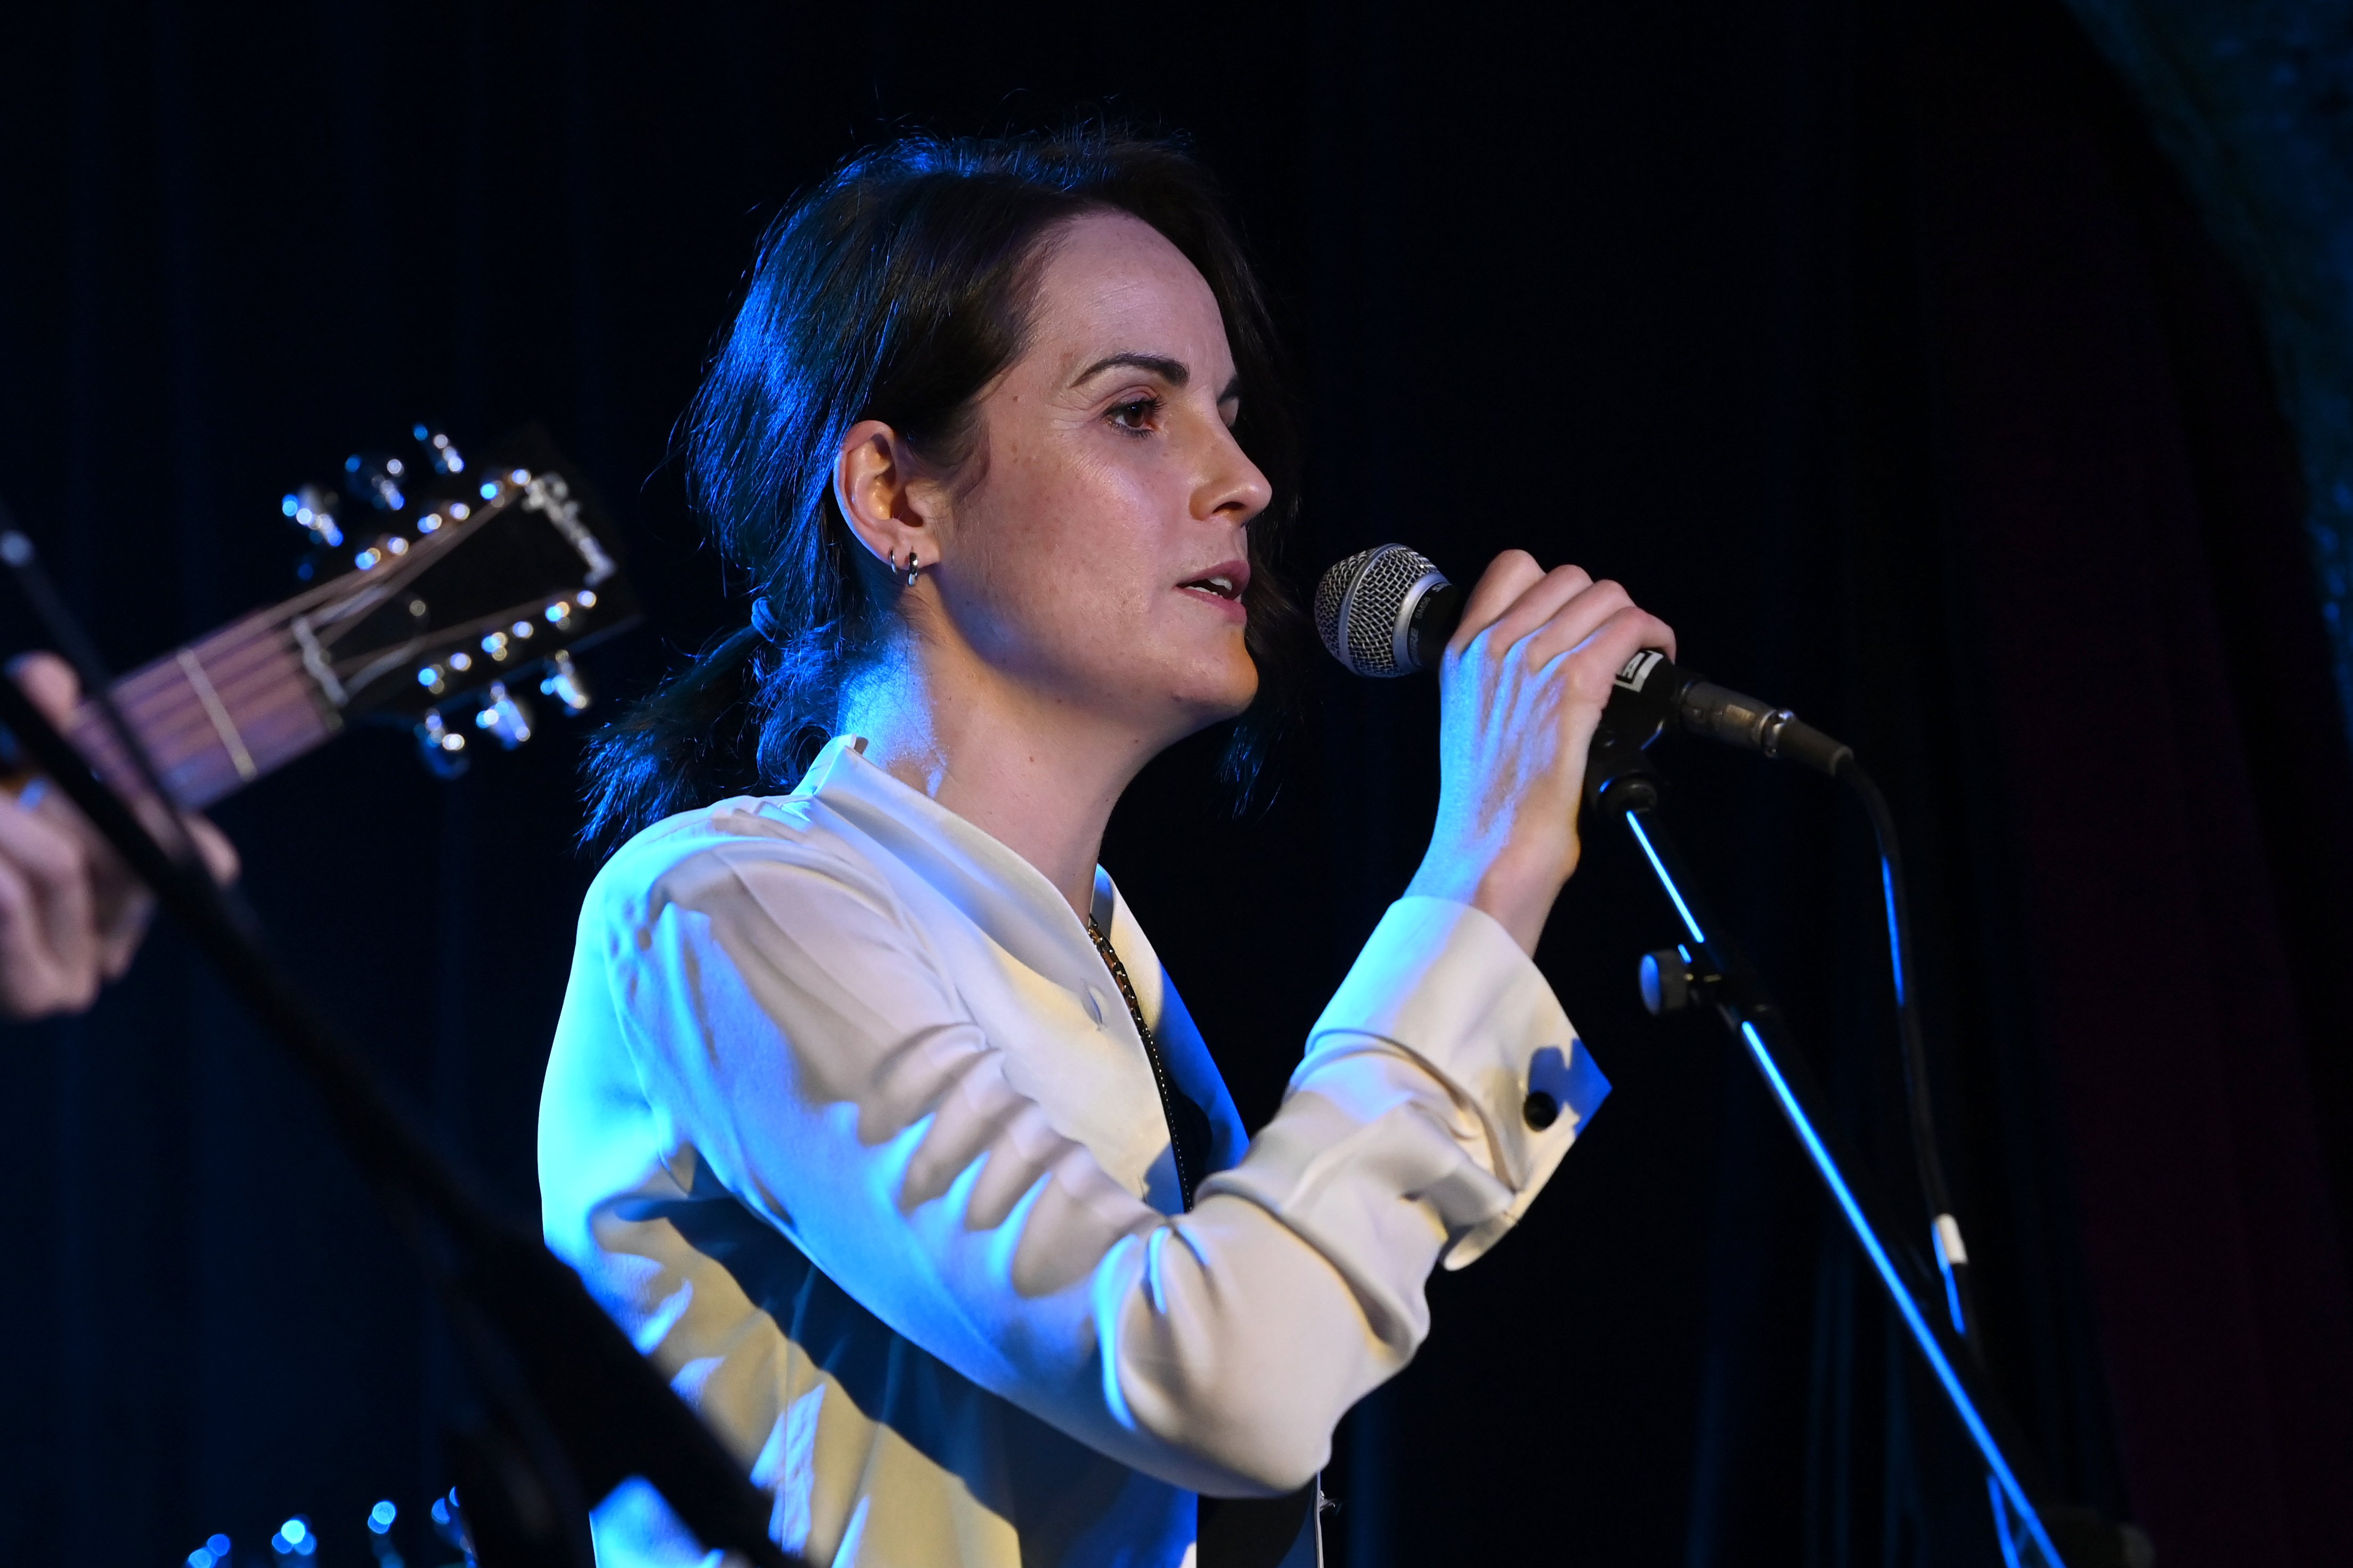 Michelle Dockery of Michael & Michelle performs at Omeara London on June 06, 2022 in London, England. | Source: Getty Images